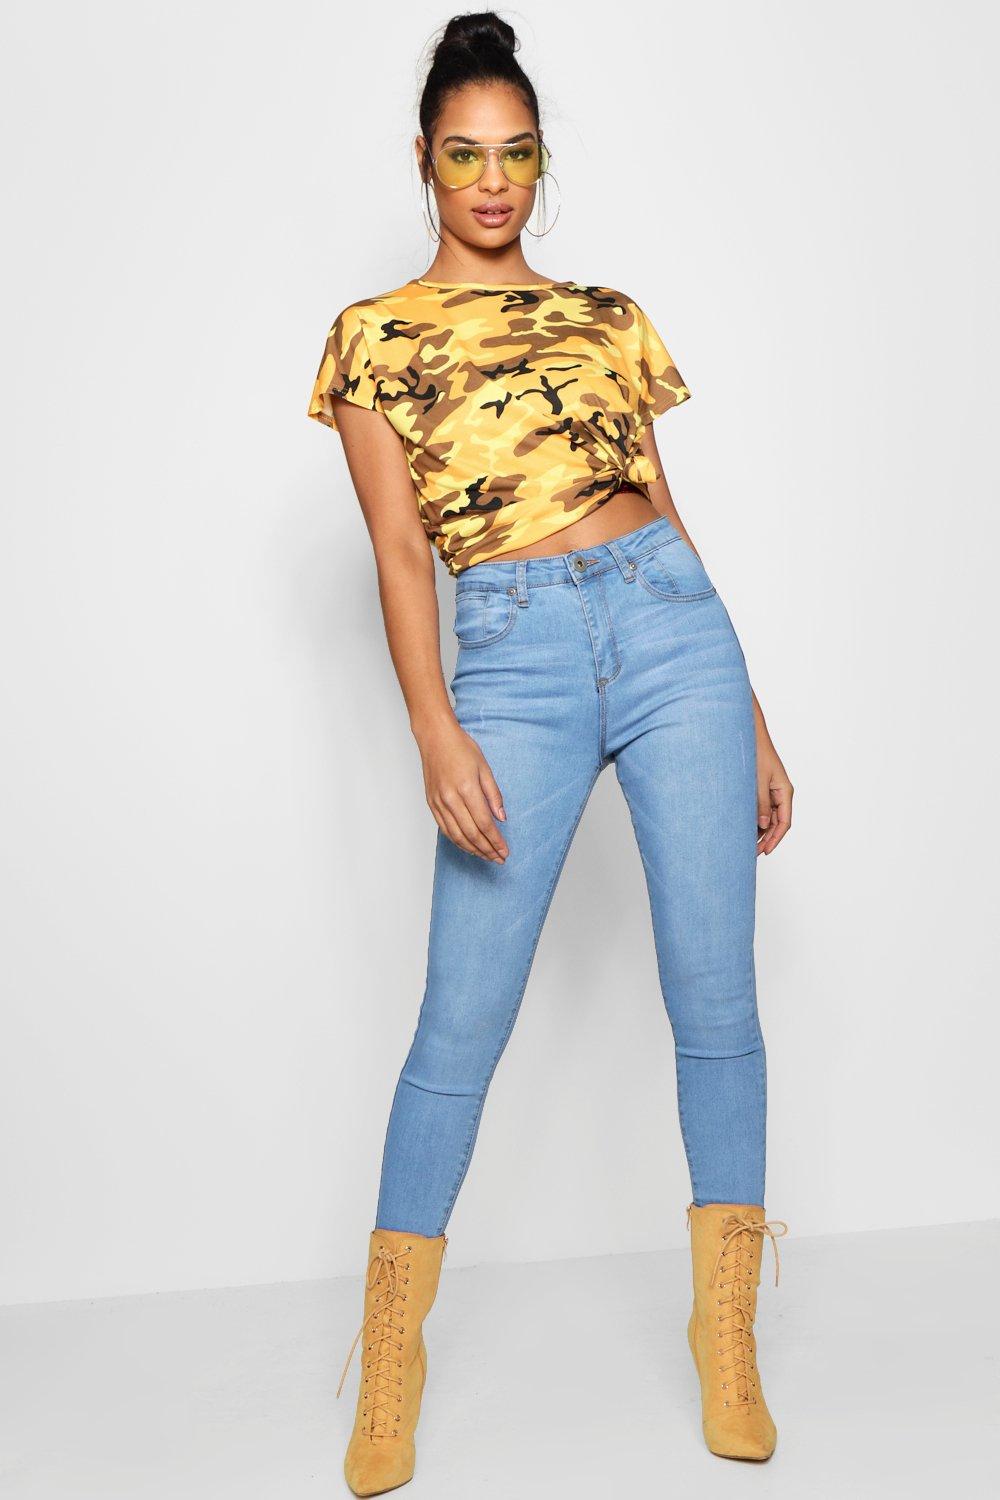 mid rise stretch skinny jeans